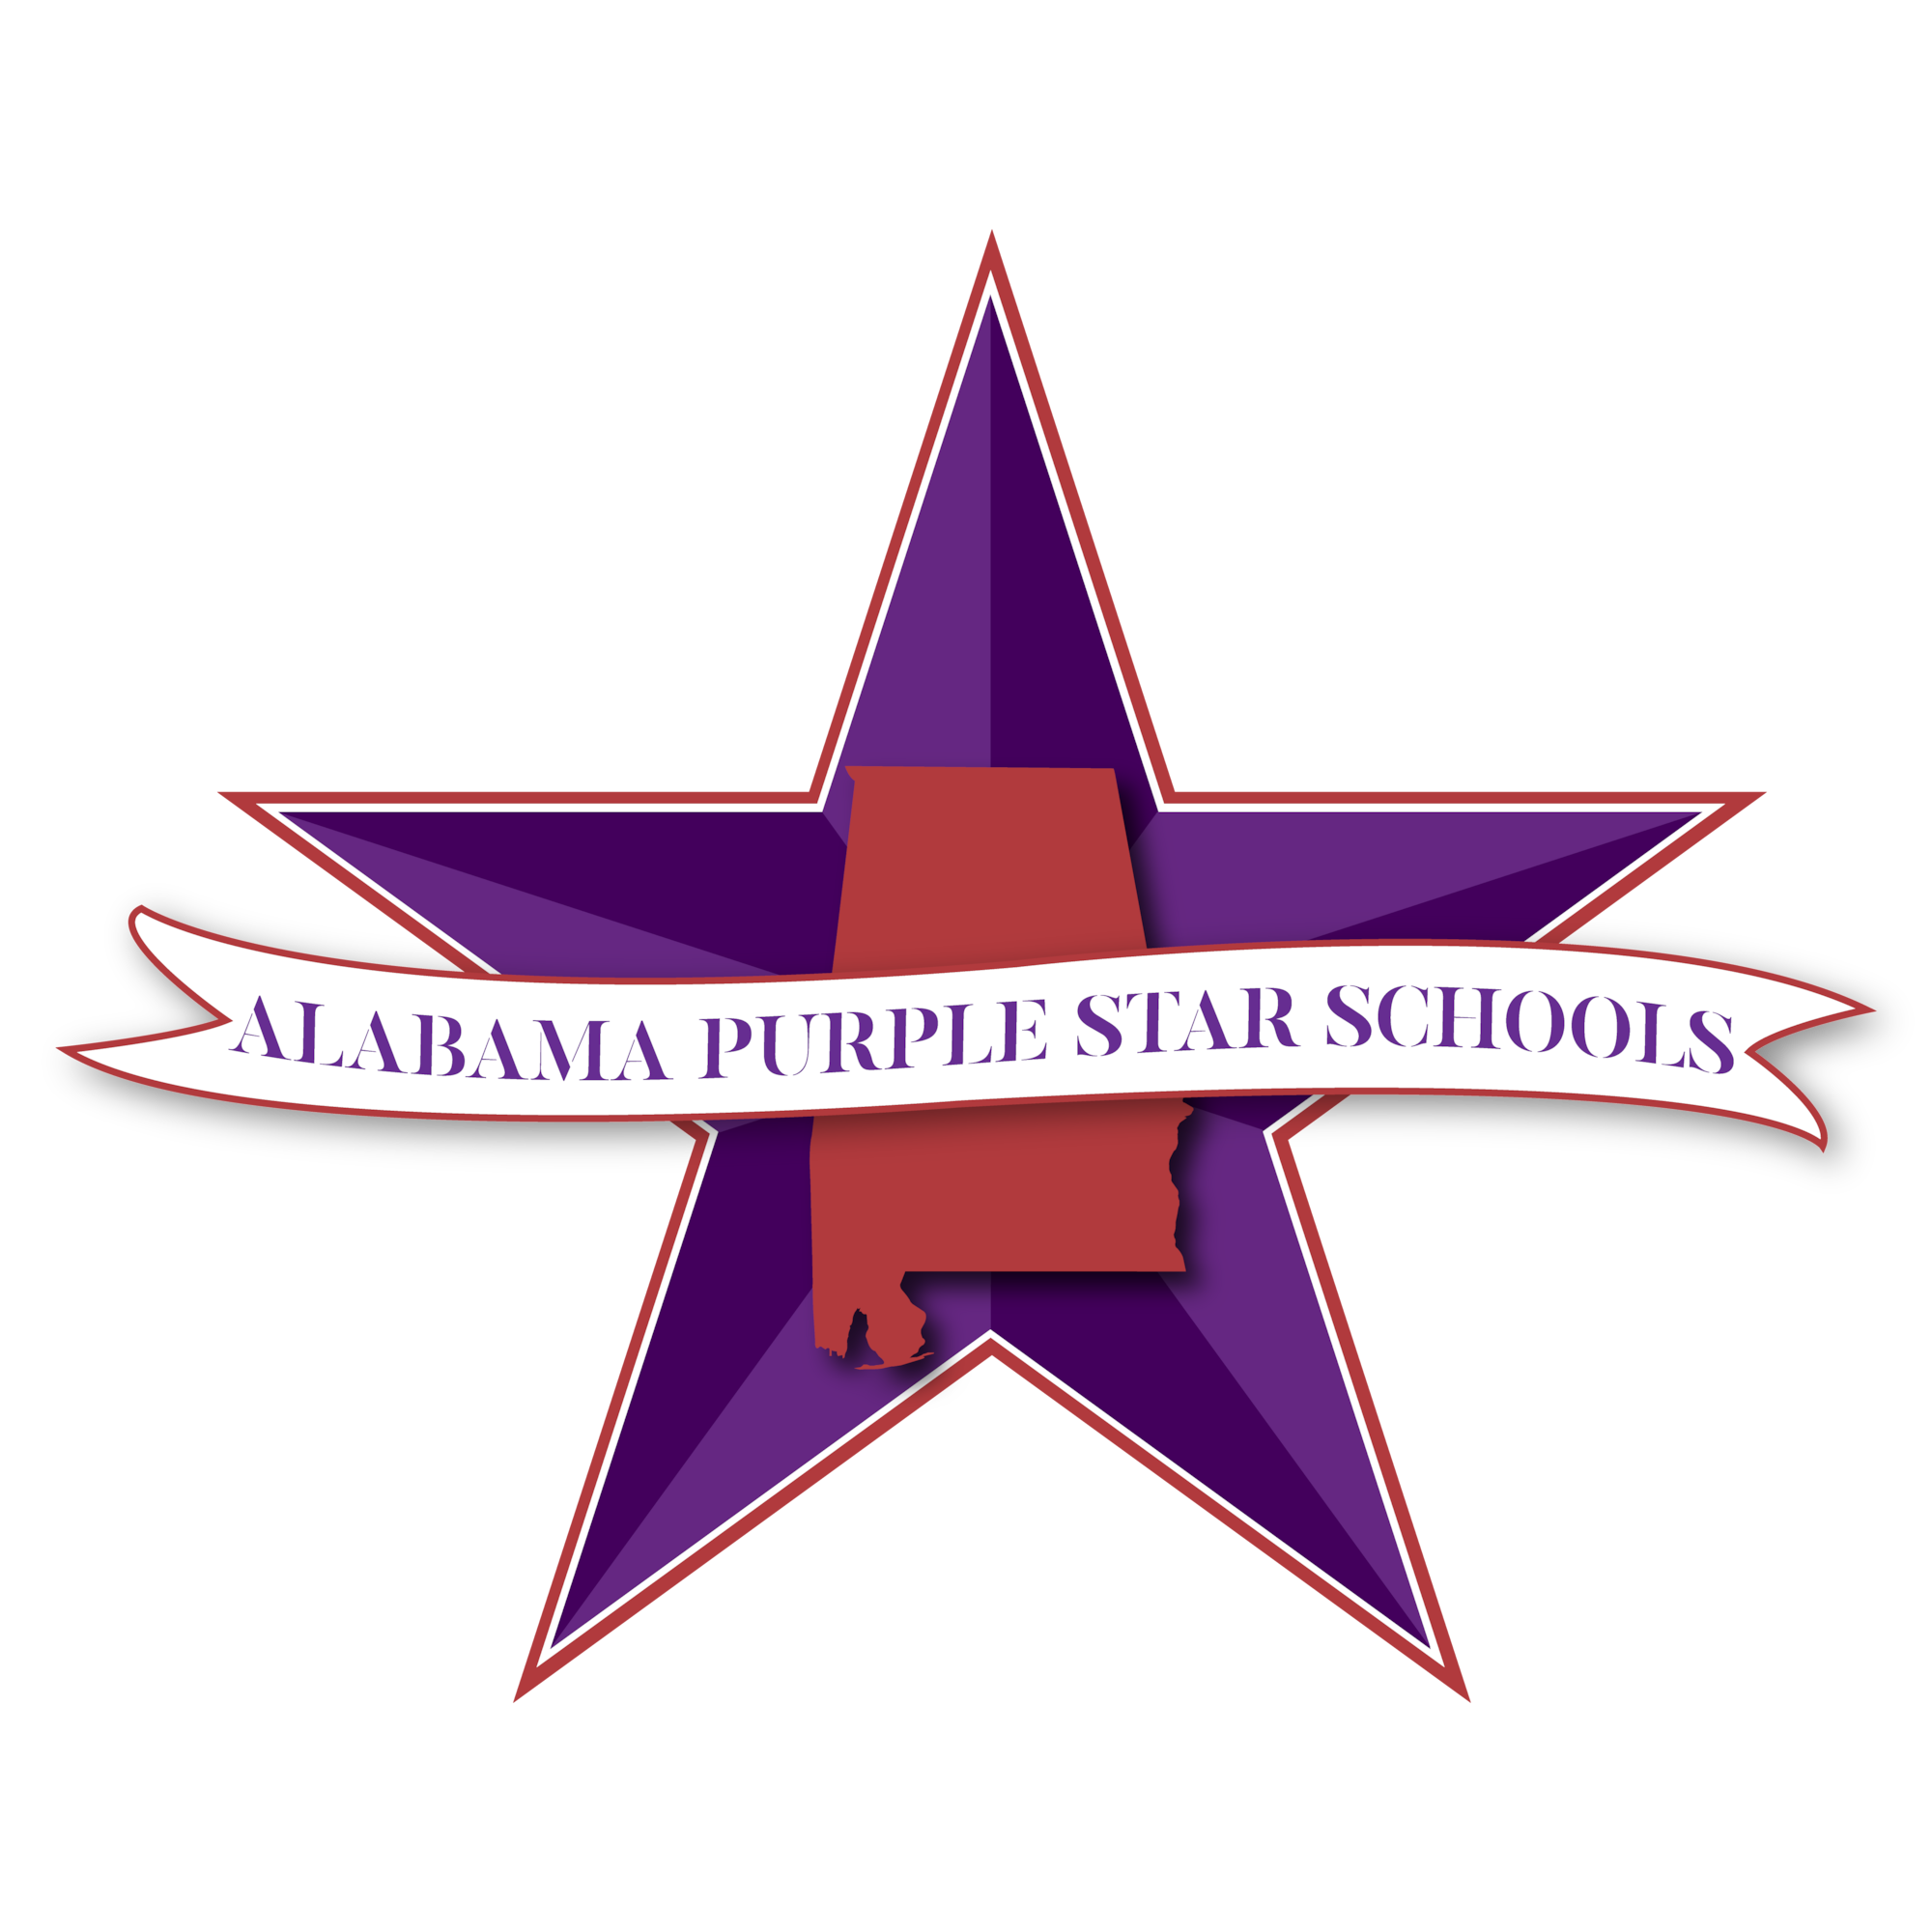 In 2022, eight River region schools achieved Purple Star designation in the inaugural year. By 2024, the number has grown to 76 schools with 53 additional schools that achieved Purple Star School designation and were recognized at the Alabama State Board of Education meeting.